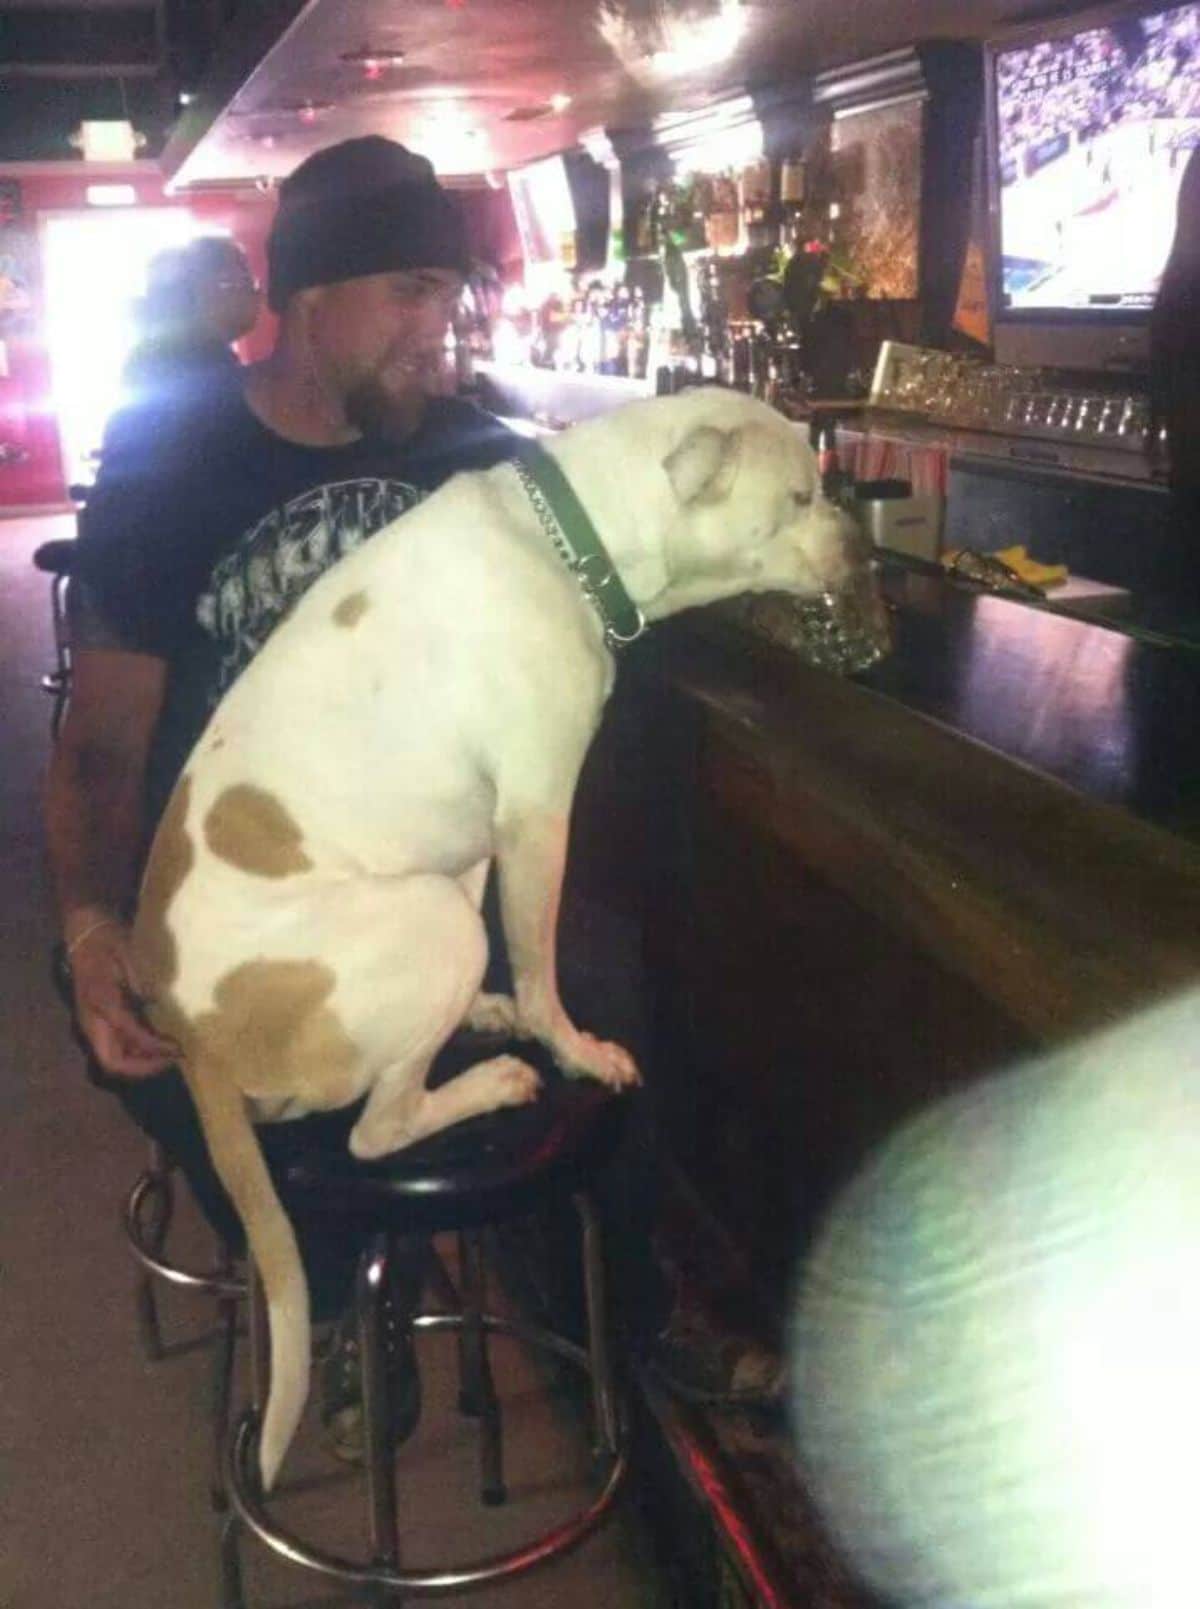 brown and white dog sitting on a black bar stool at a bar drinking out of a glass next to a man